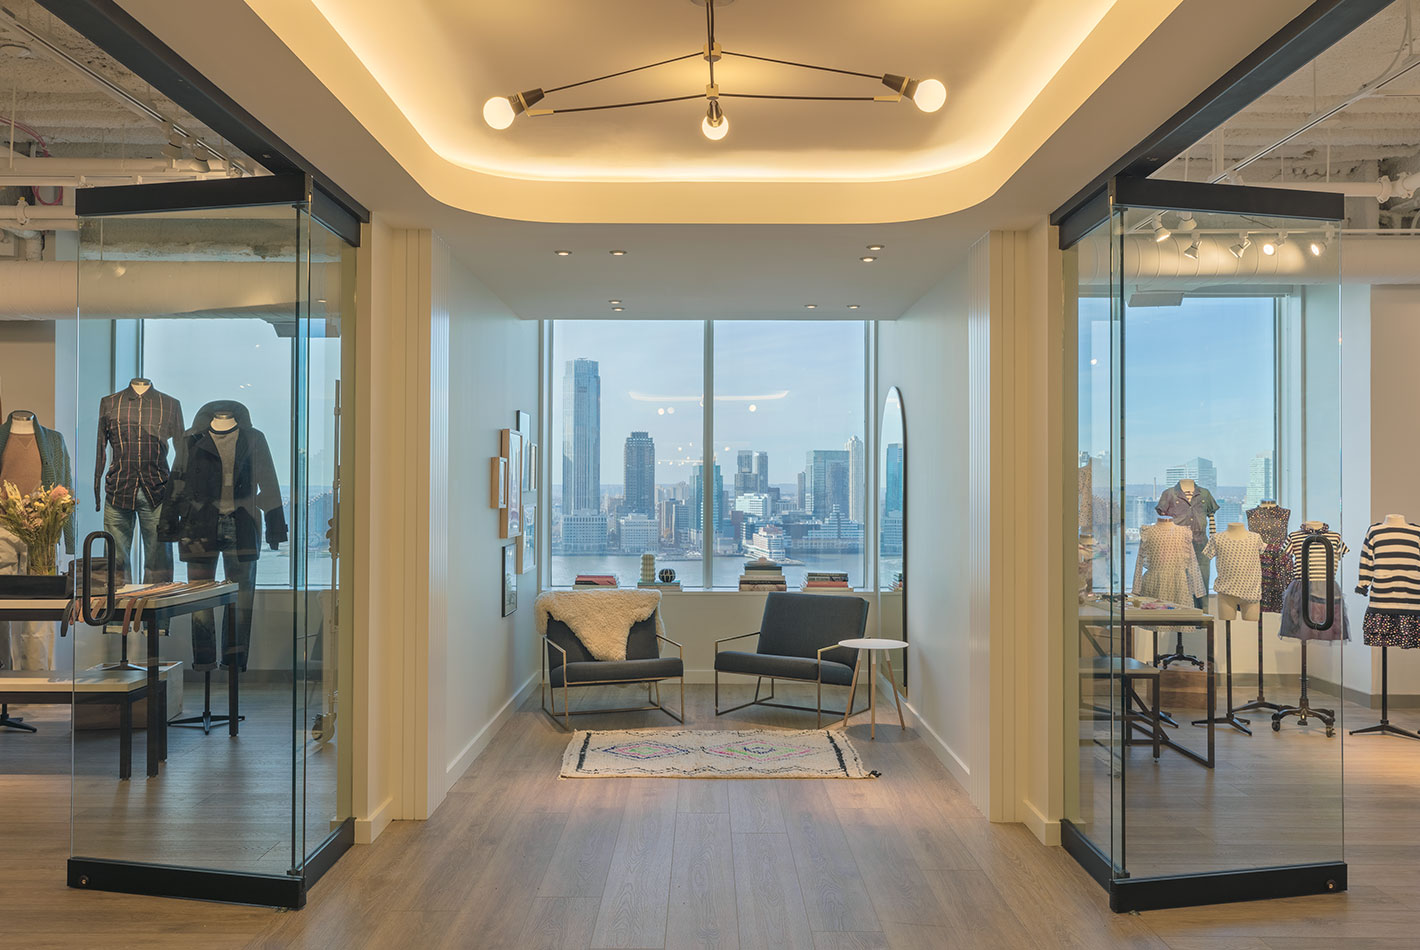 Plate glass walls showcase the Hudson river and the New Jersey skyline in the store vignette area at J Crew Headquarters. Club chairs provide a place to sit.